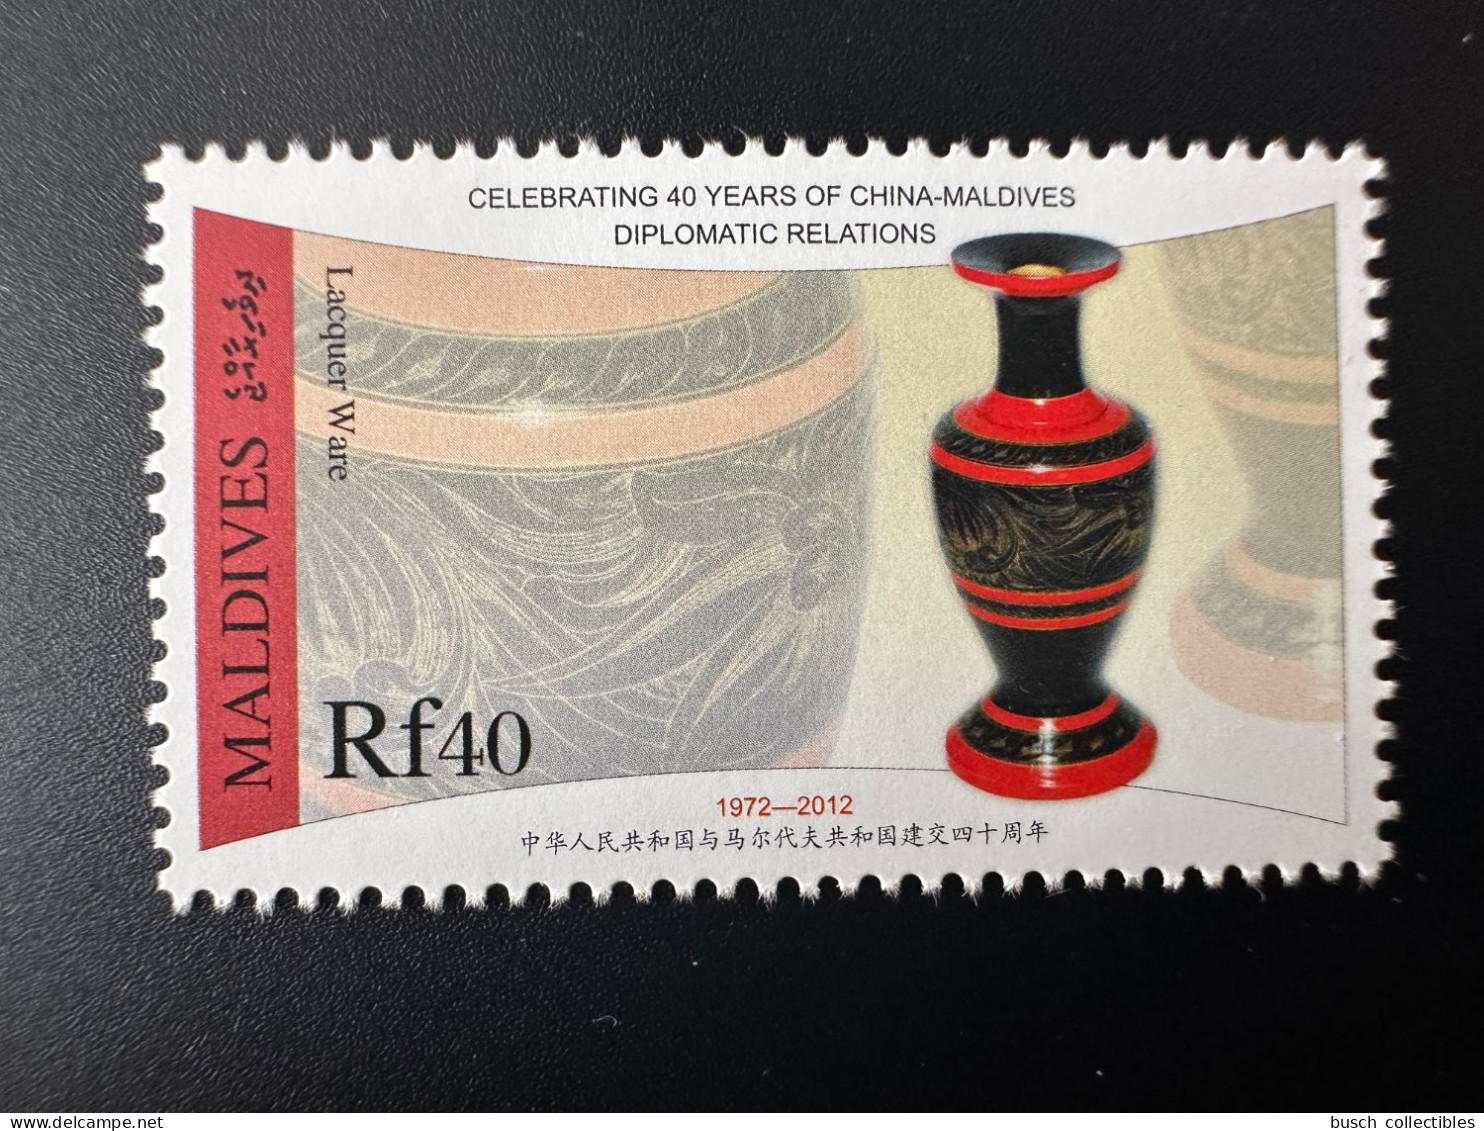 Maldives 2012 / 2013 Mi. 4839 Diplomatic Relations China Chine 40 Years Lacquer Ware Vase - Unused Stamps